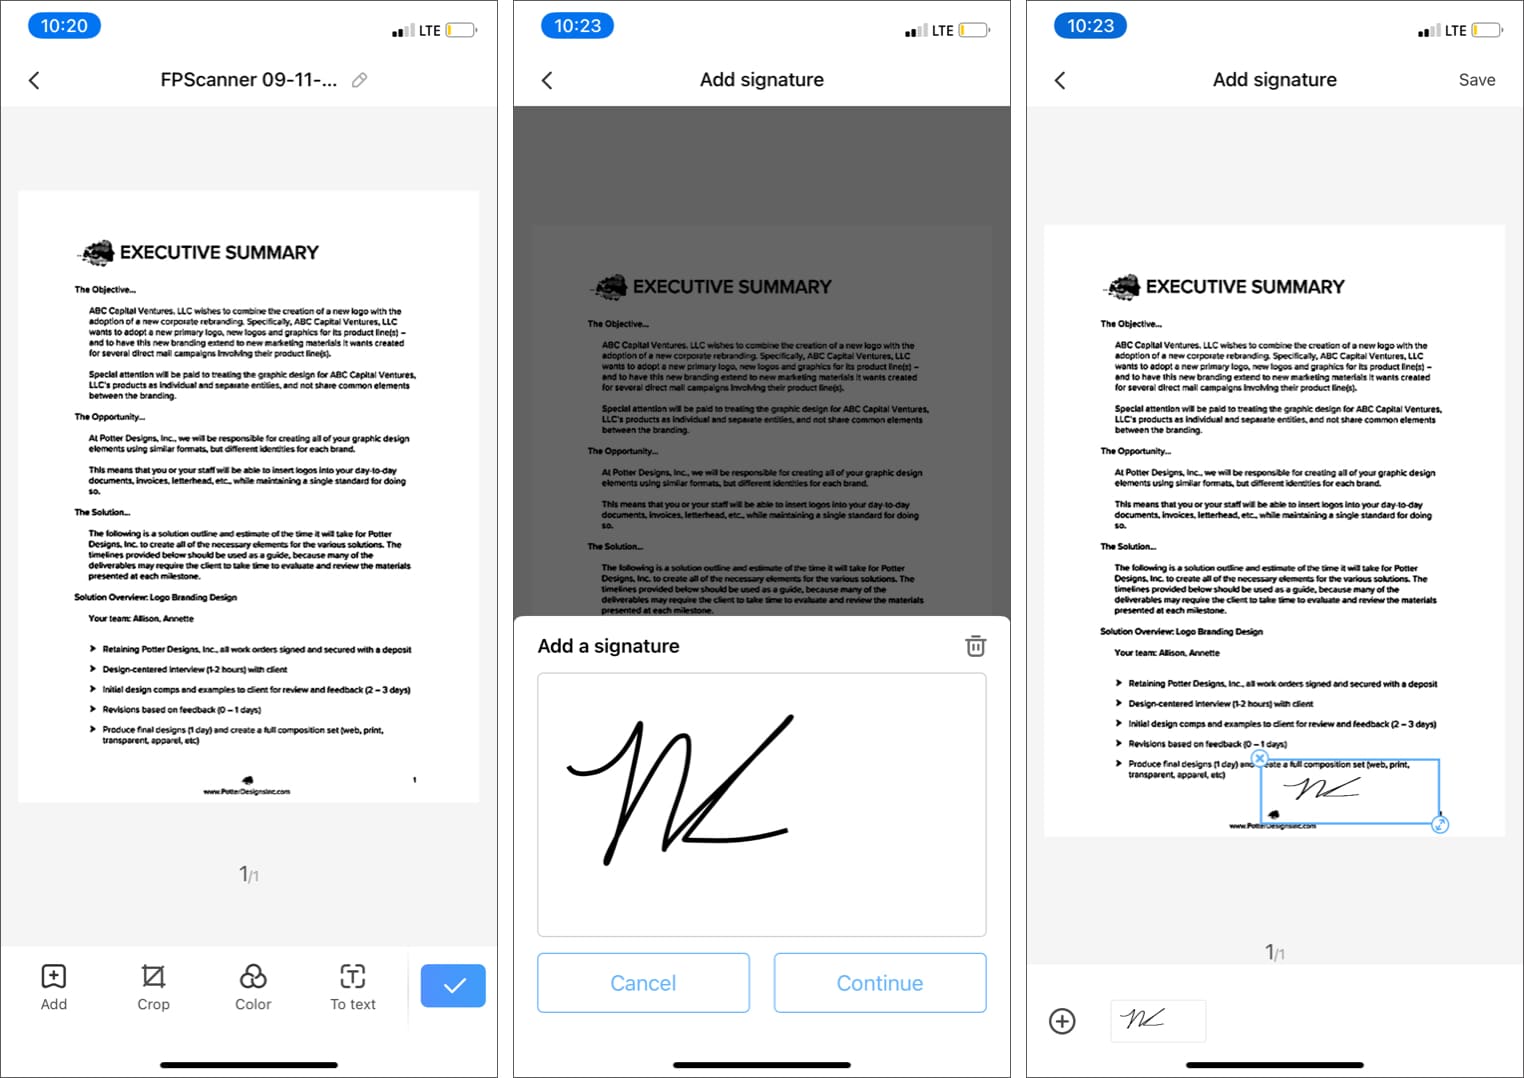 Add a signature in document using FP Scanner